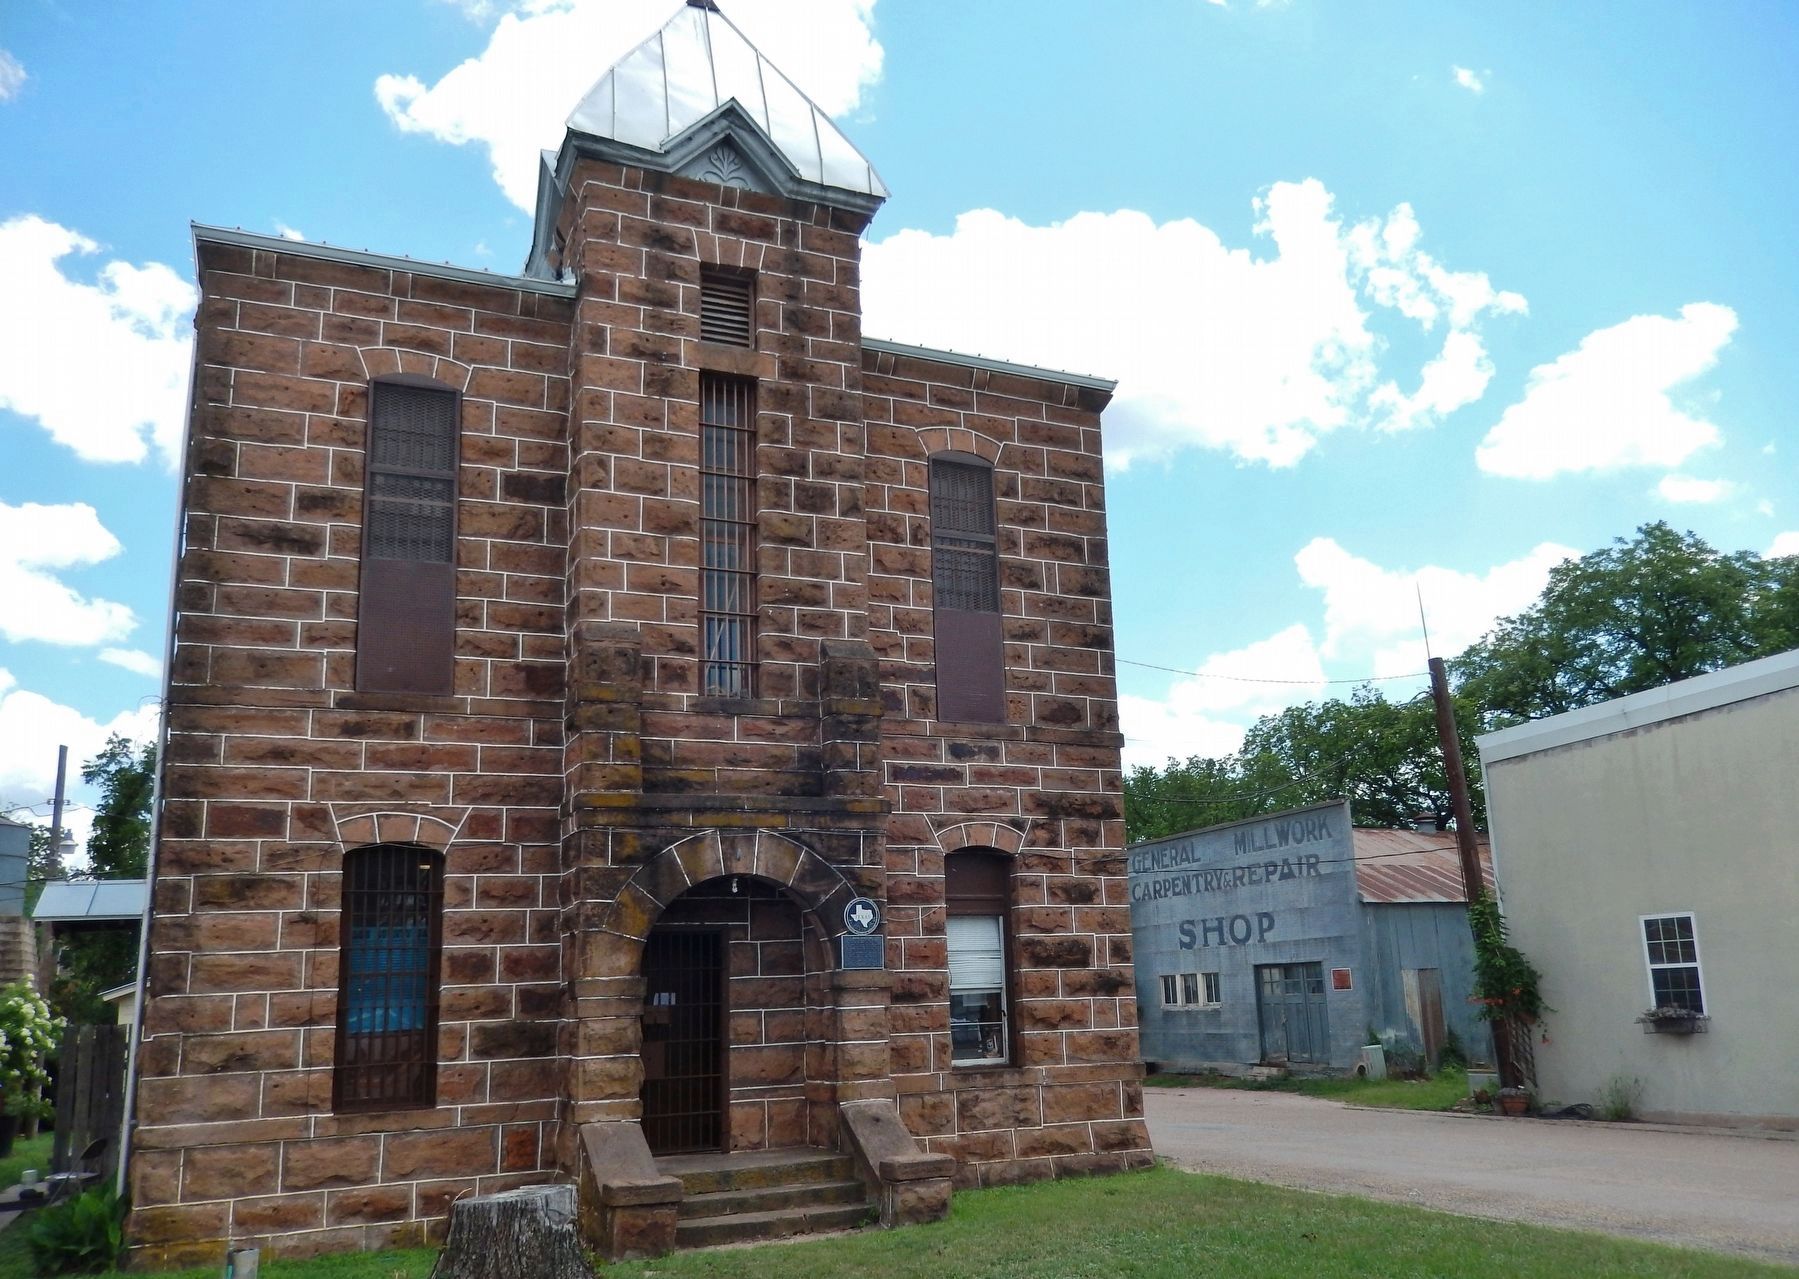 Mason County Jail (<i>front view; showing central tower</i>) image. Click for full size.